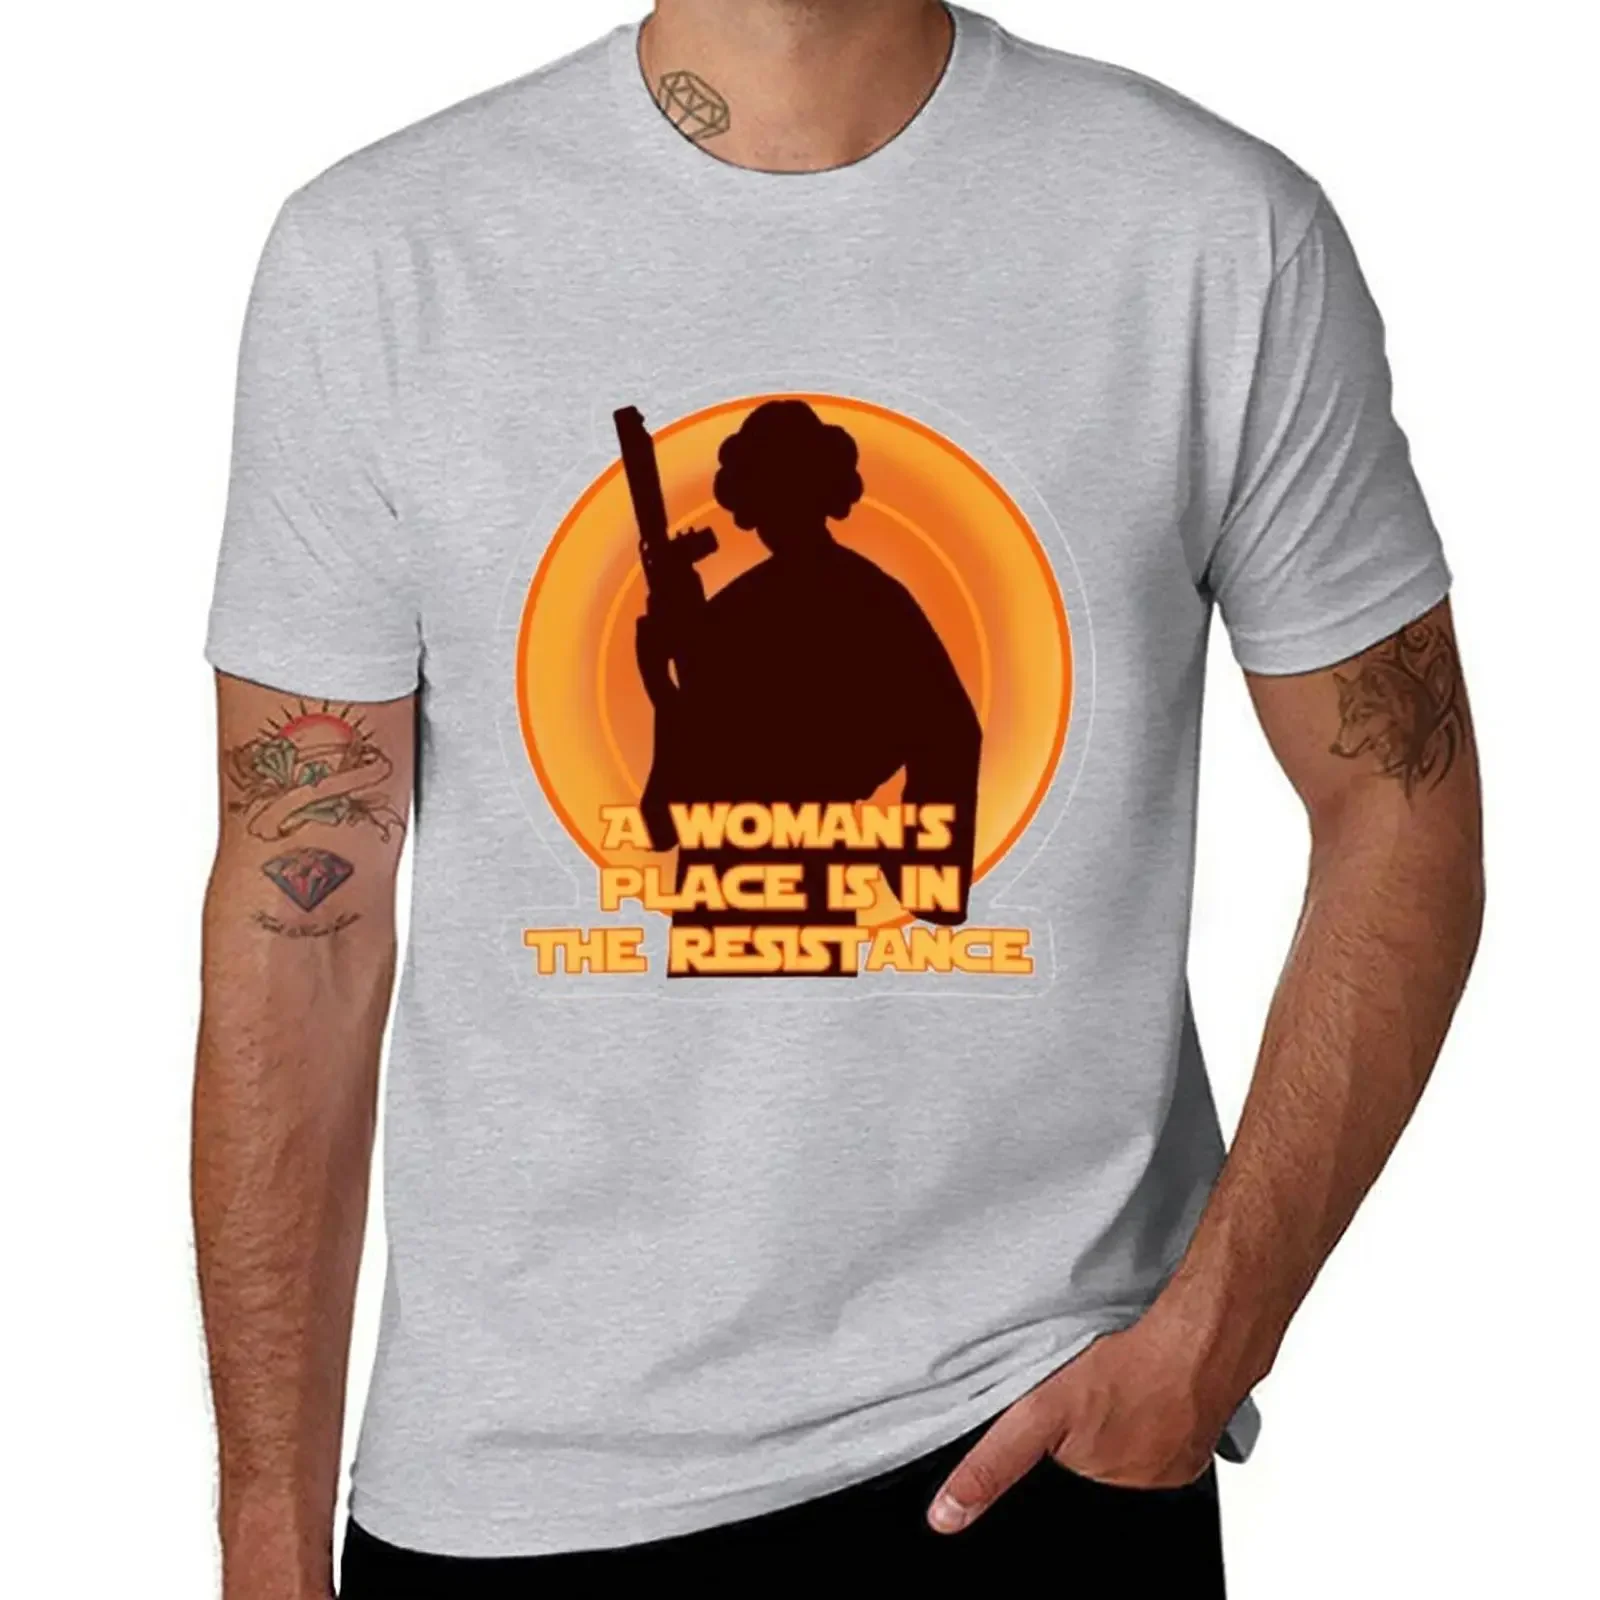 

a womans place is in the resistance T-Shirt sports fans customs design your own boys whites mens graphic t-shirts